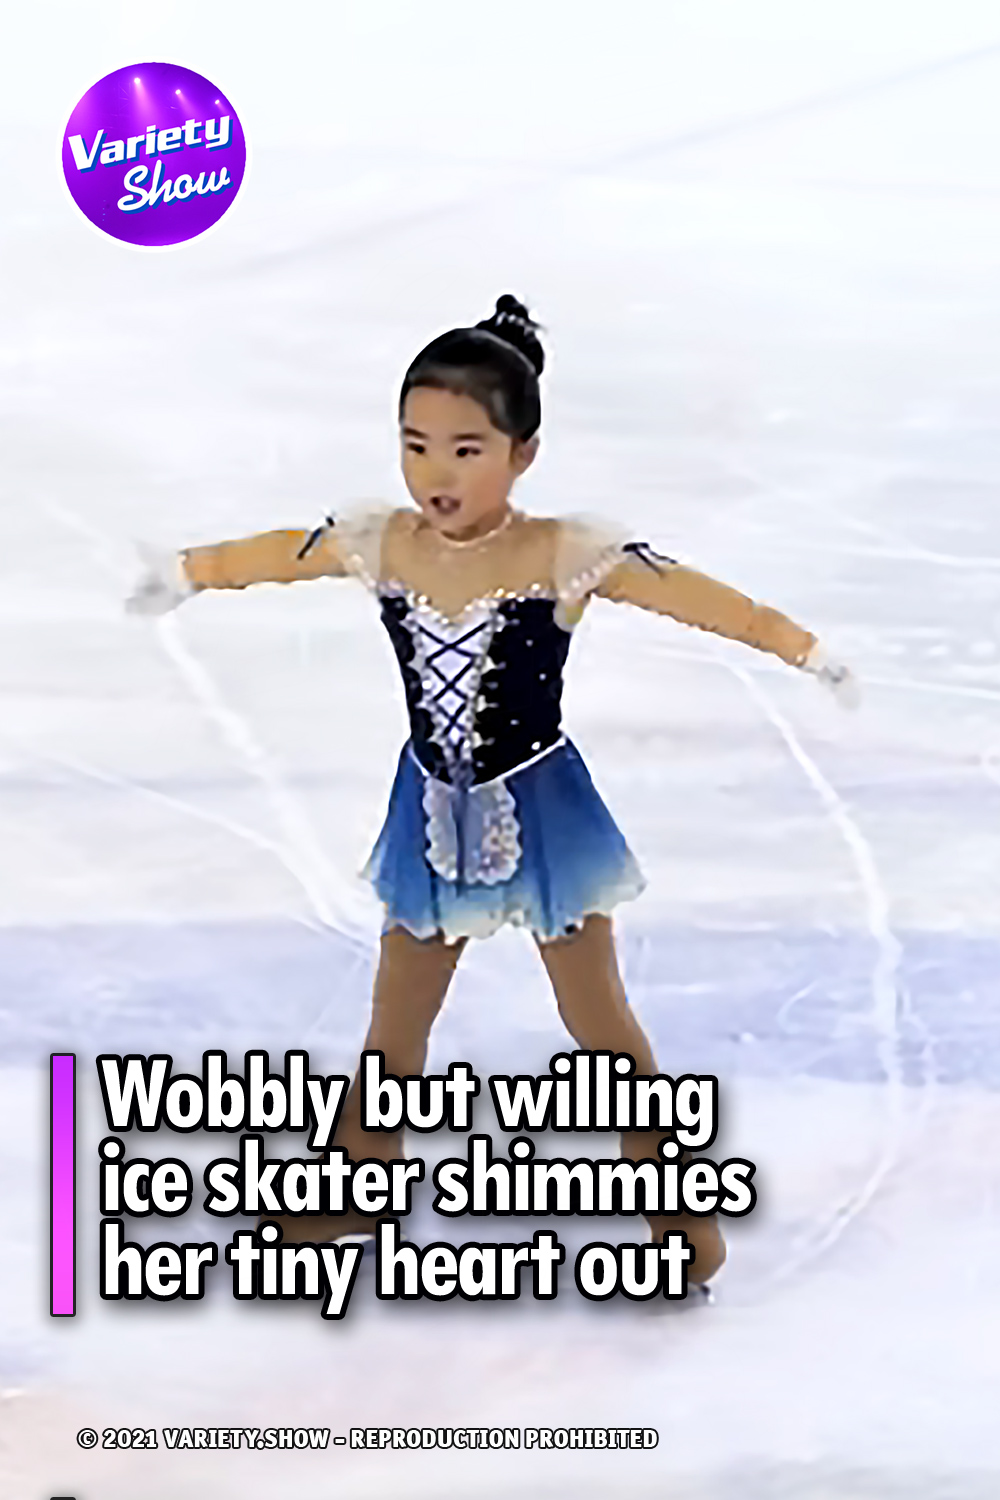 Wobbly but willing ice skater shimmies her tiny heart out